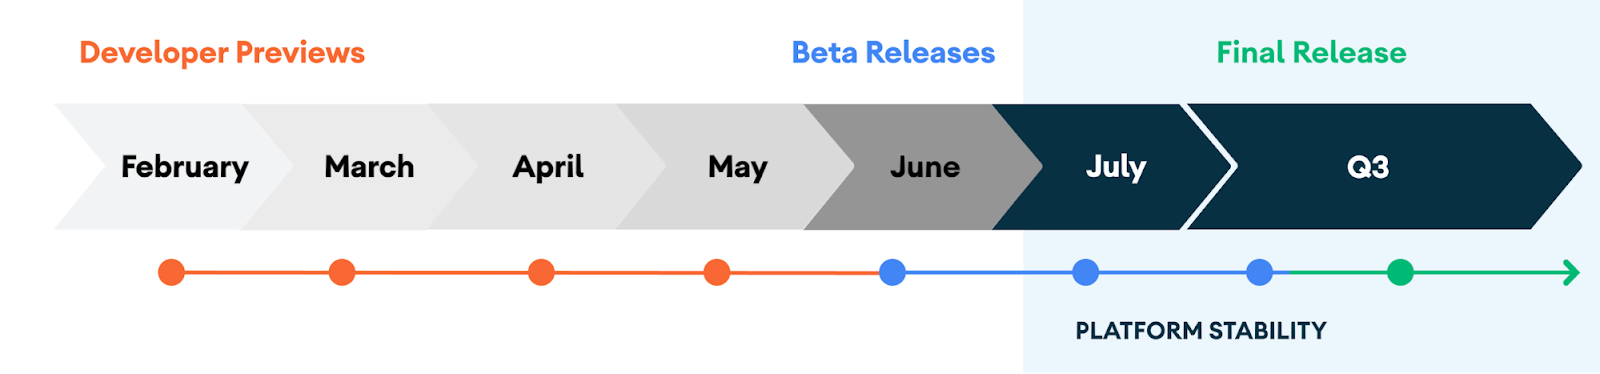 Android 11 Beta 2 and Platform Stability now available timeline.png